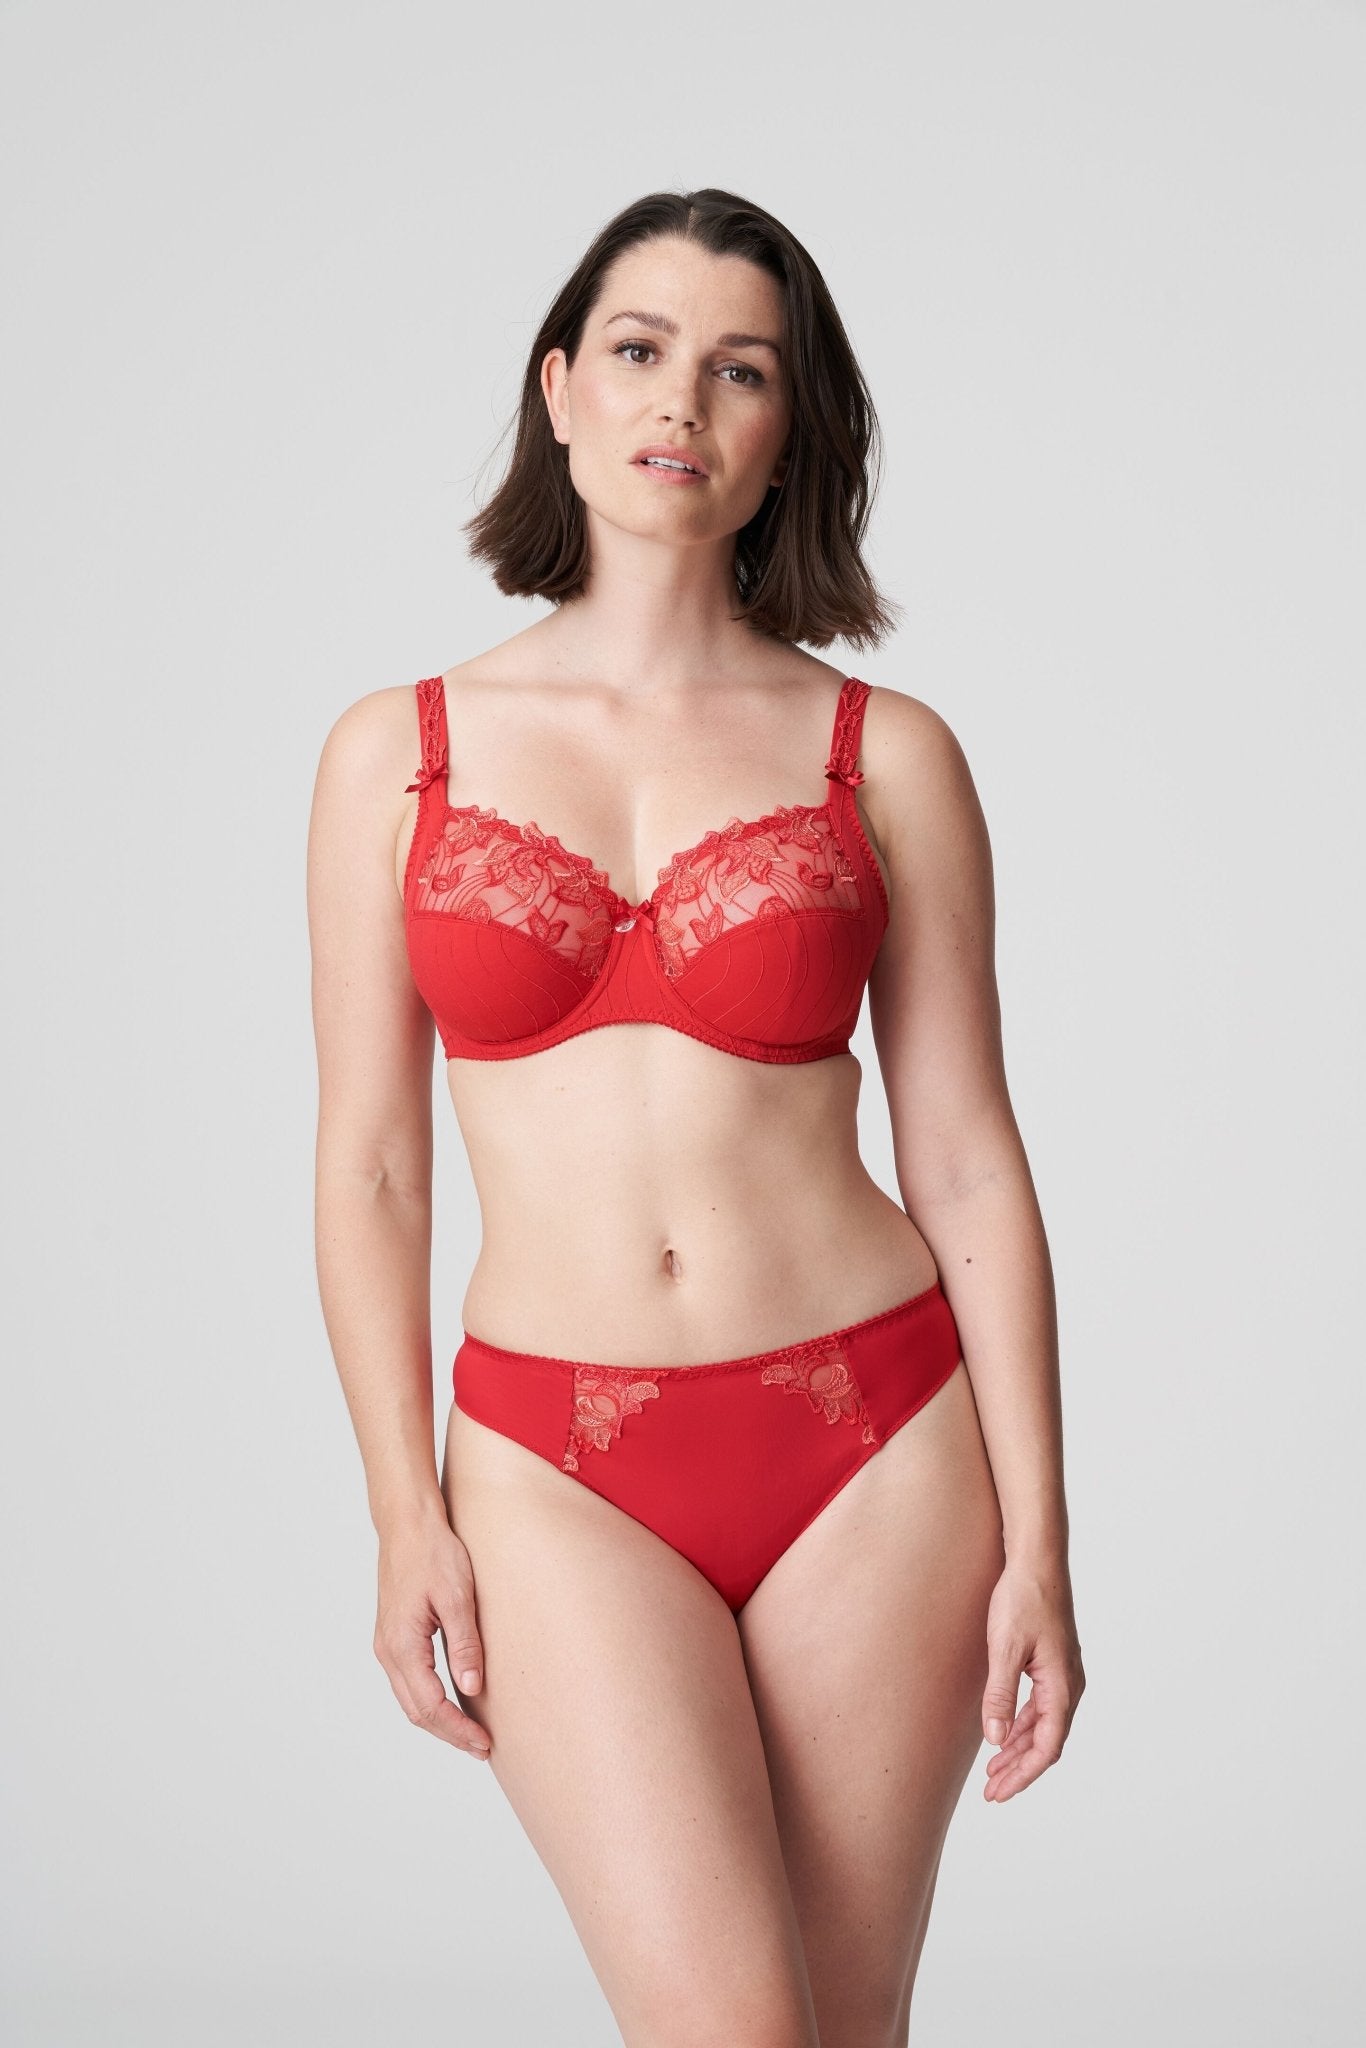 BRA -GARTER SET PLUS SIZE GERMANY OPEN CUP UNDERWIRE RED 38,40,42 D,E,F CUP